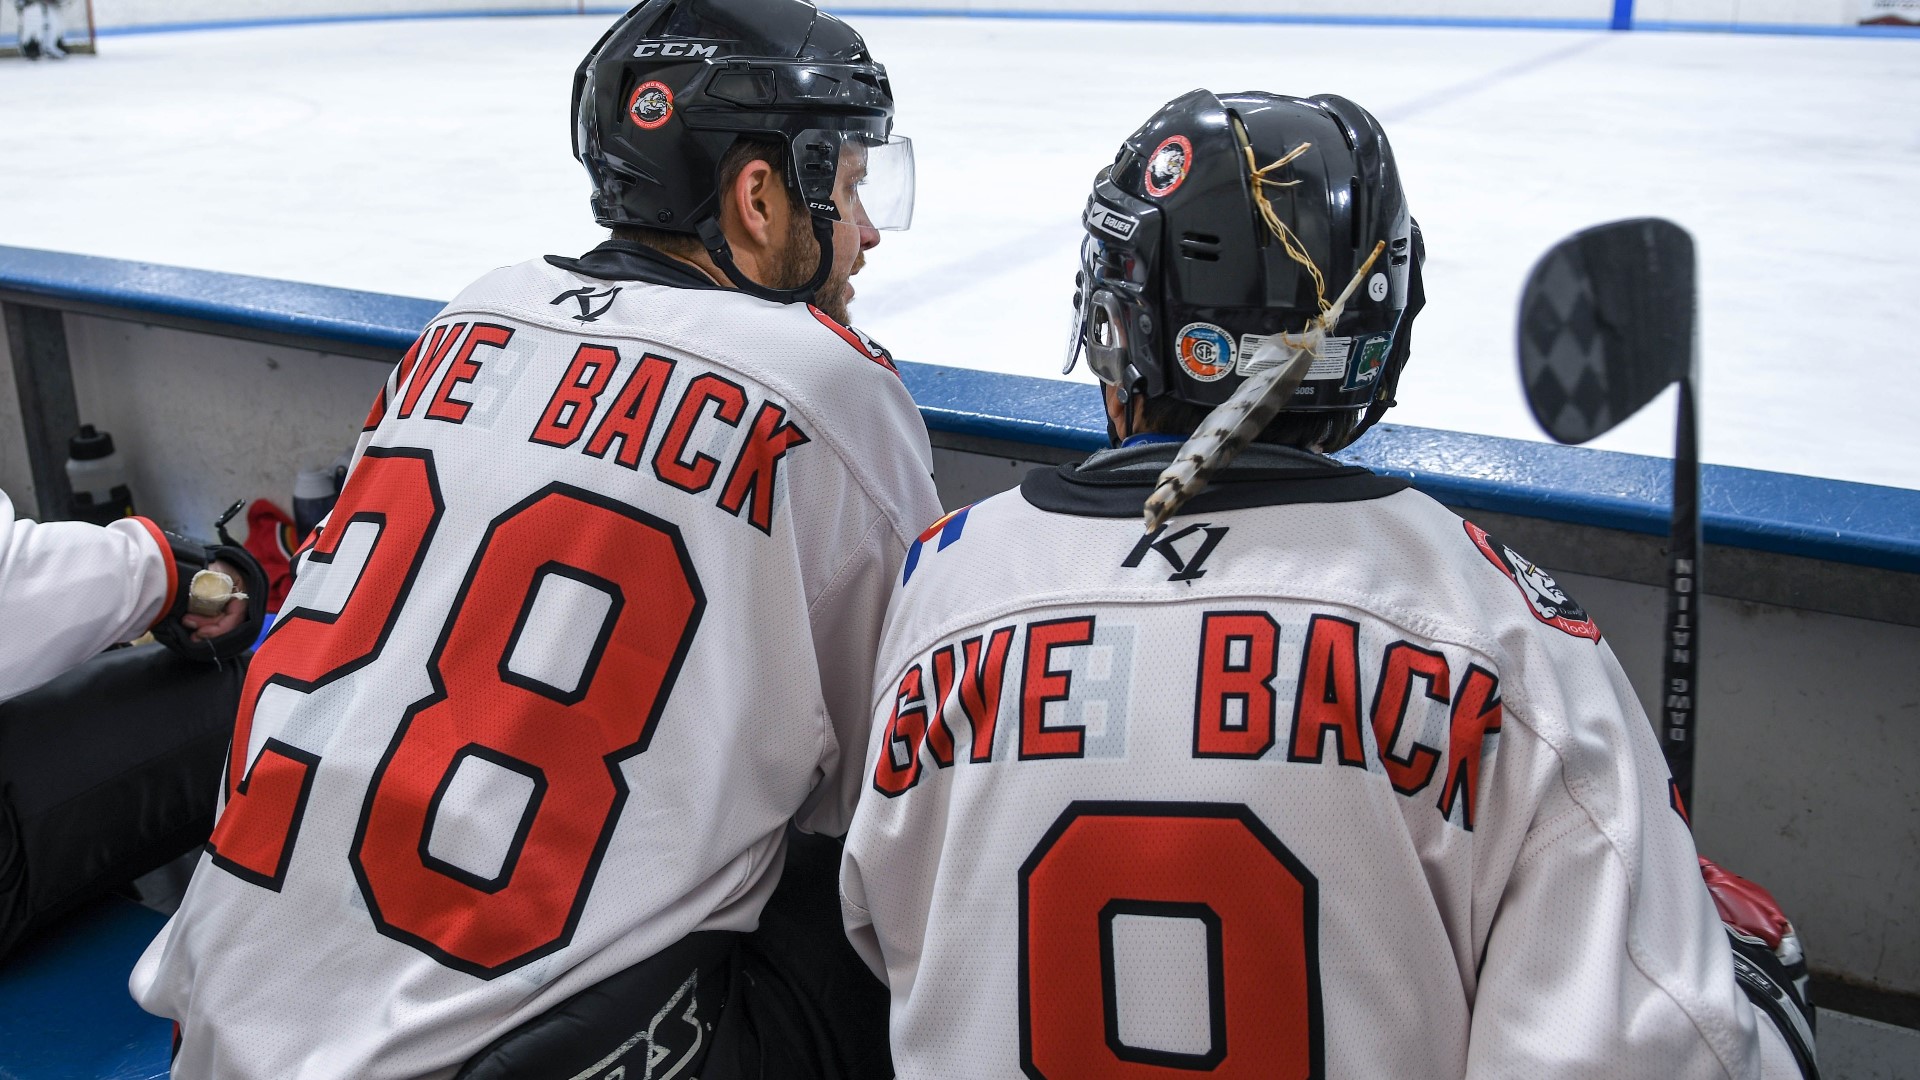 Dawg Nation Hockey Foundation has raised more than nine million dollars in its 12-year existence. The foundation donates money to families experiencing hardship.